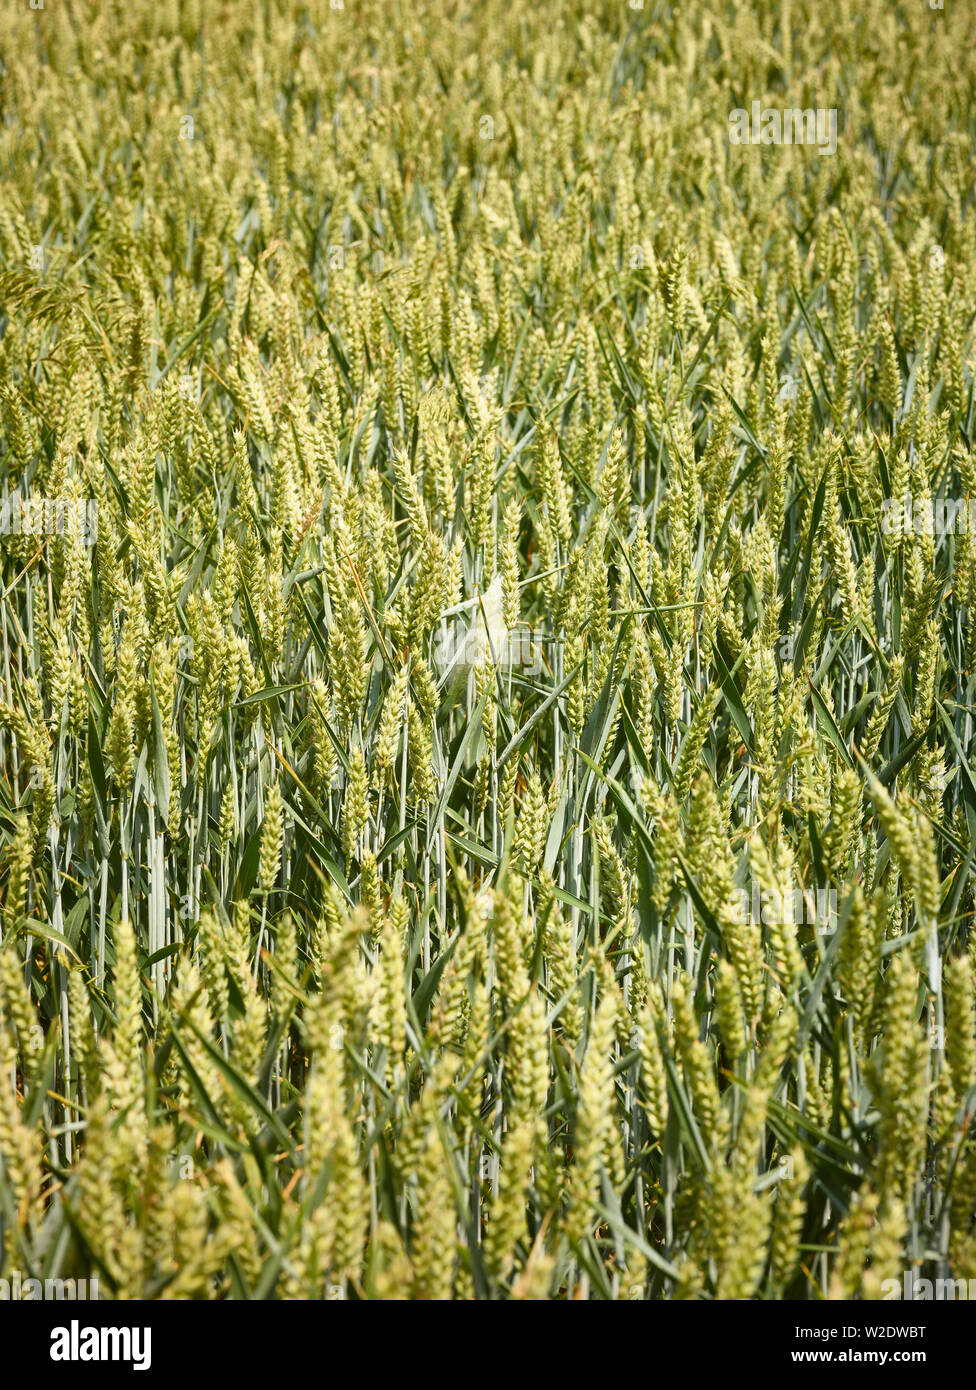 Wheat close up abstract nature portrait Stock Photo